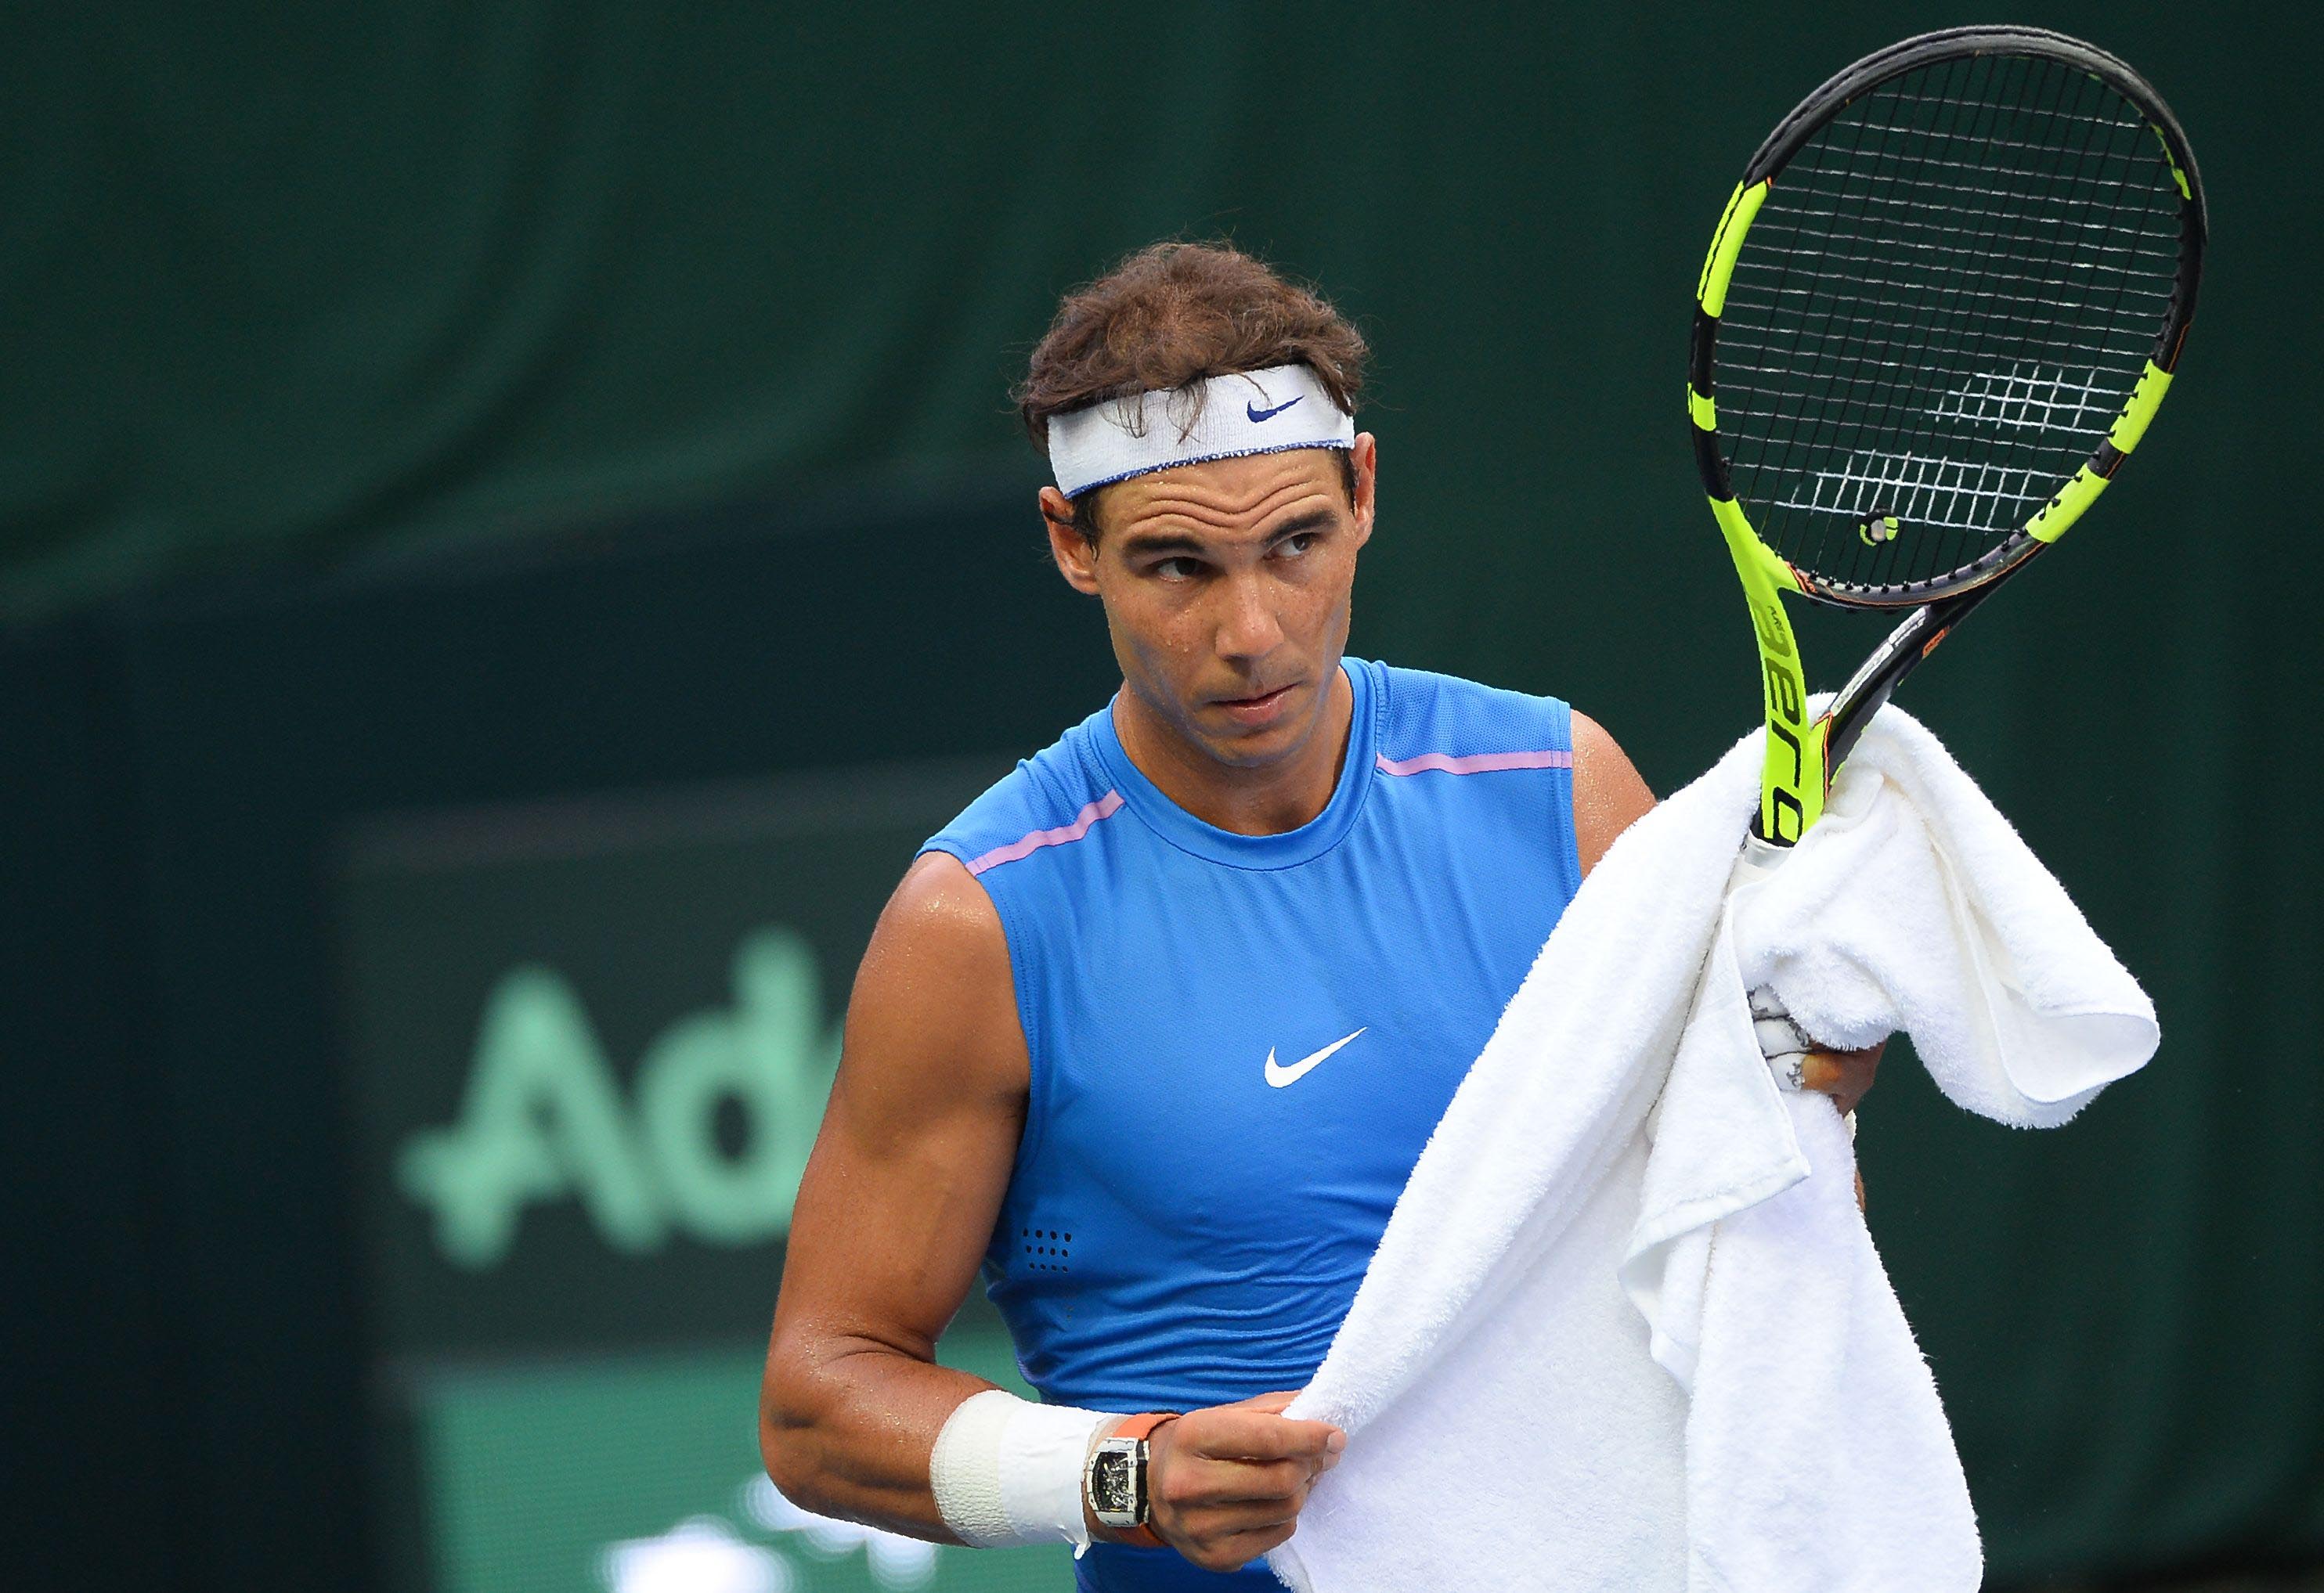 Nadal ends season to recover from wrist injury | Latest News & Updates at Daily News ...2968 x 2035